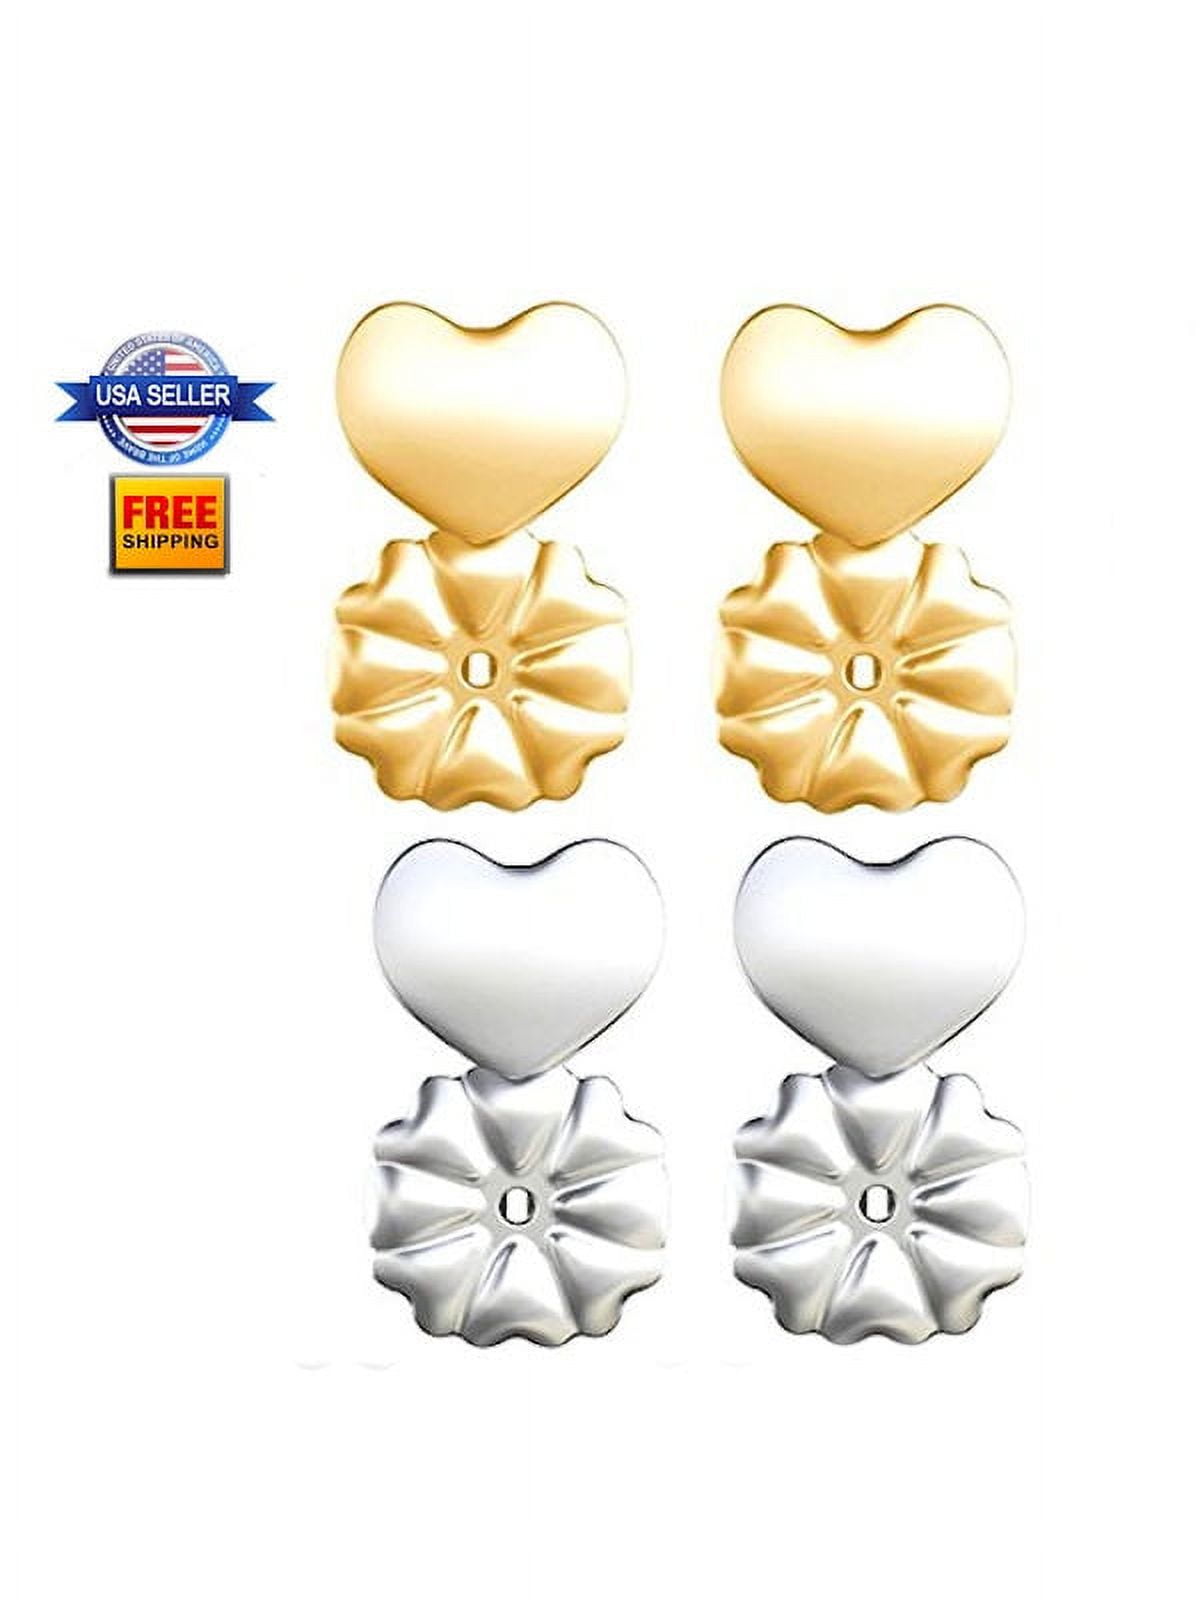 Heart Love Magic Earring Lifters Set Of 10 Adjustable Hypoallergenic Sahale  Nuts For Womens Ear Lobe Support From Mistfannie, $9.94